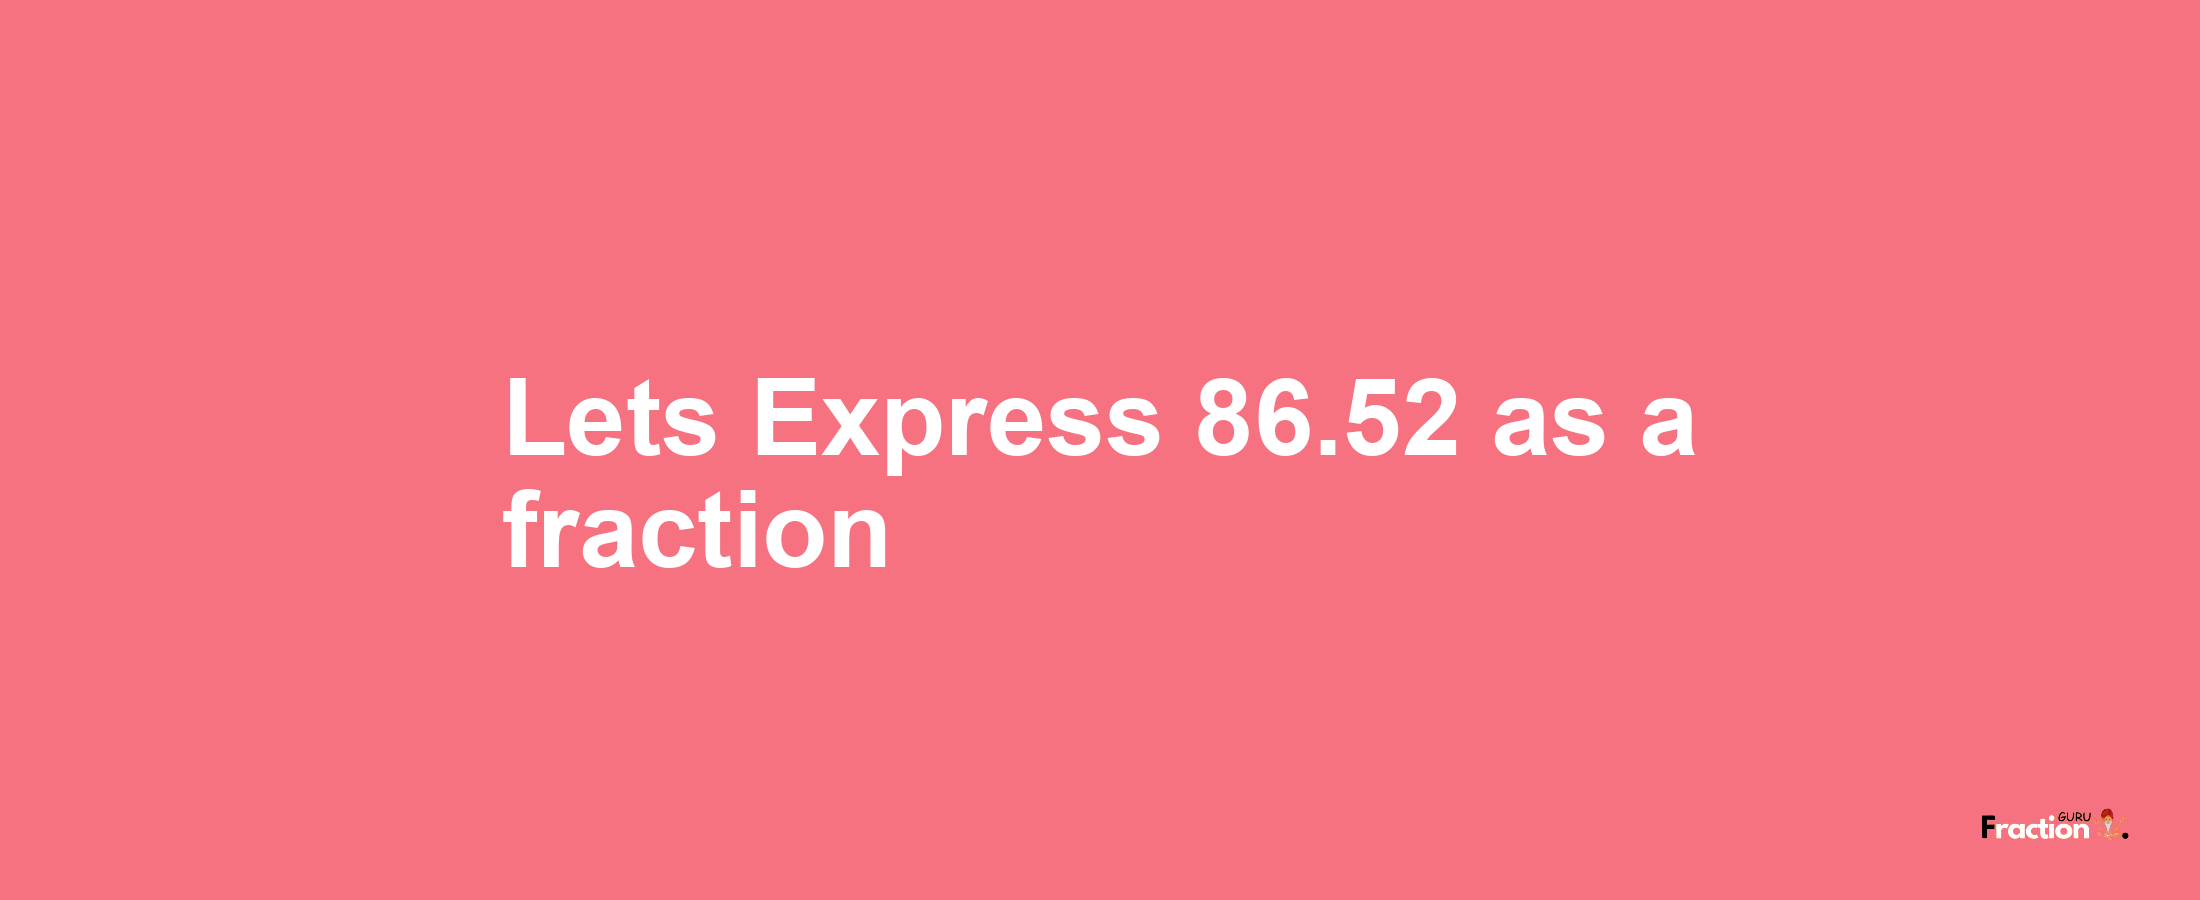 Lets Express 86.52 as afraction